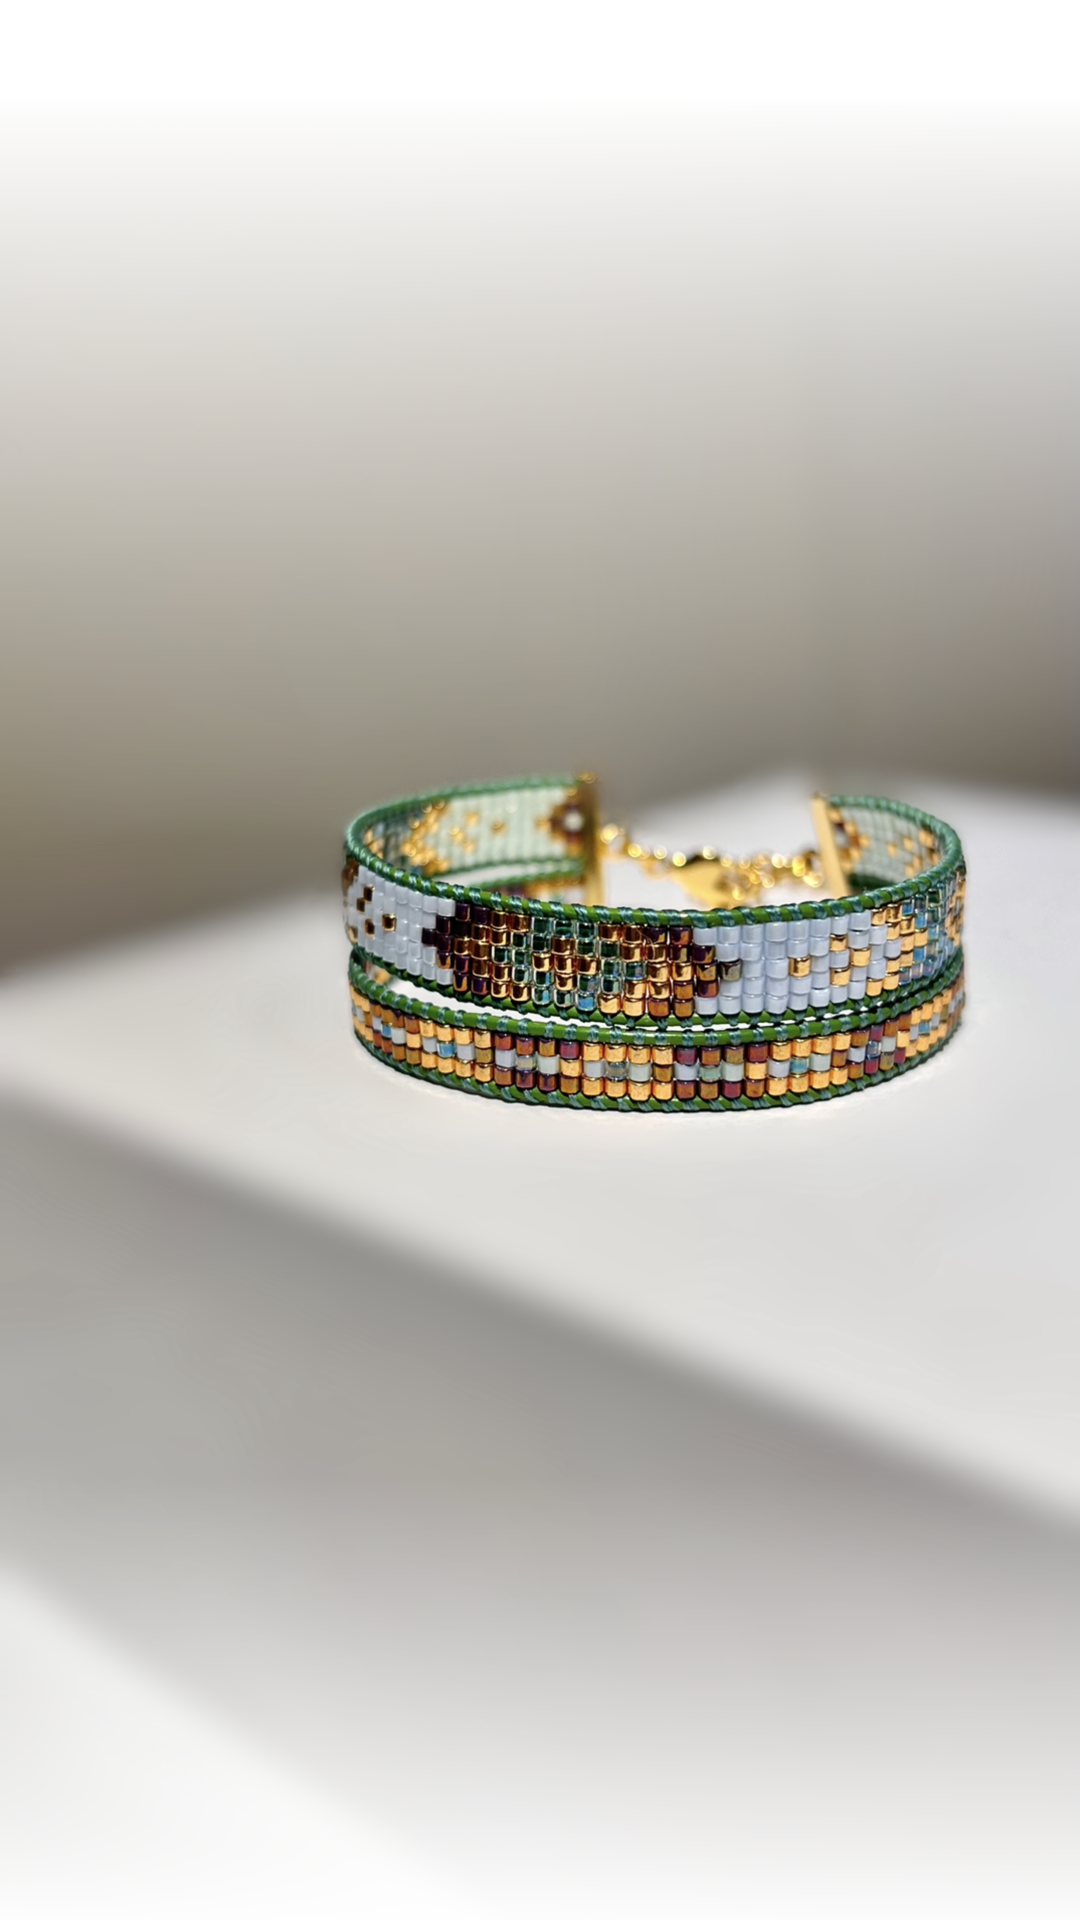 Double bracelet Emerald in green, blue shades with gold and bronze.